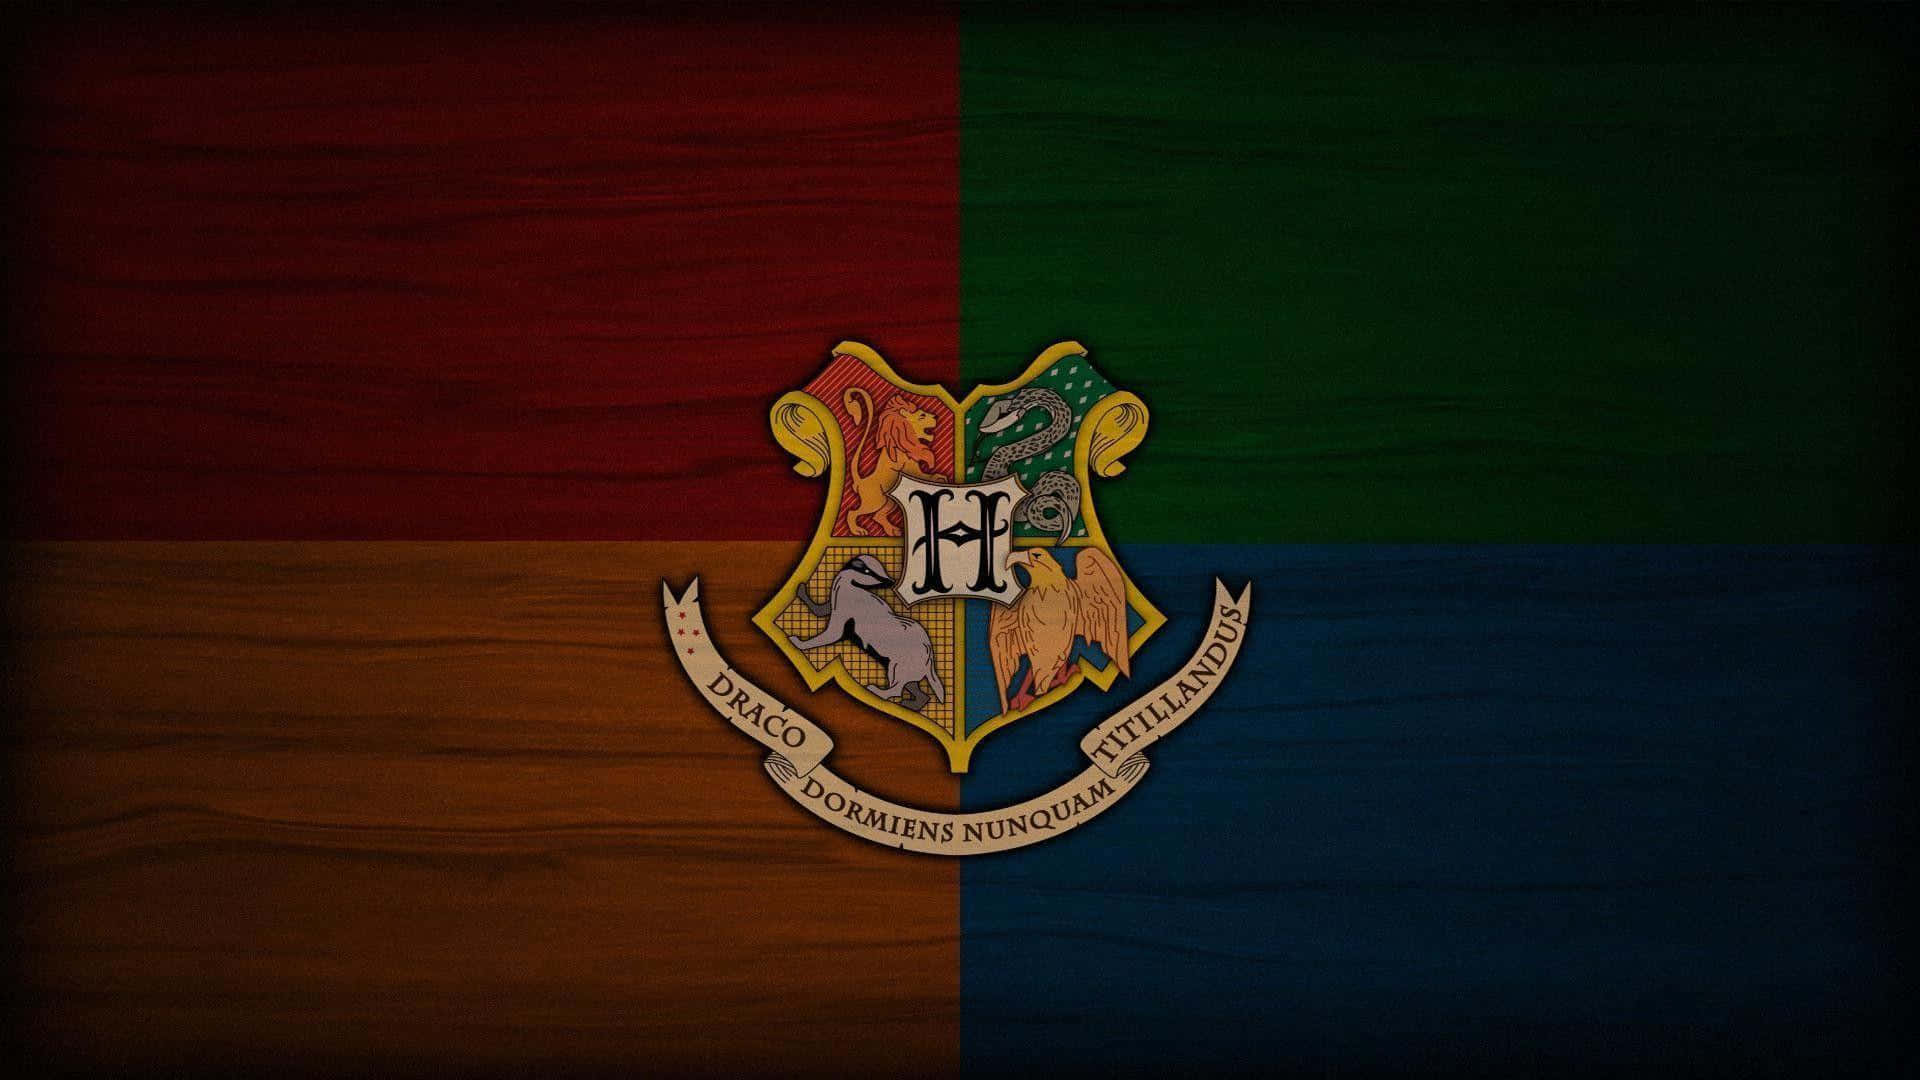 A representation of the Gryffindor house crest.